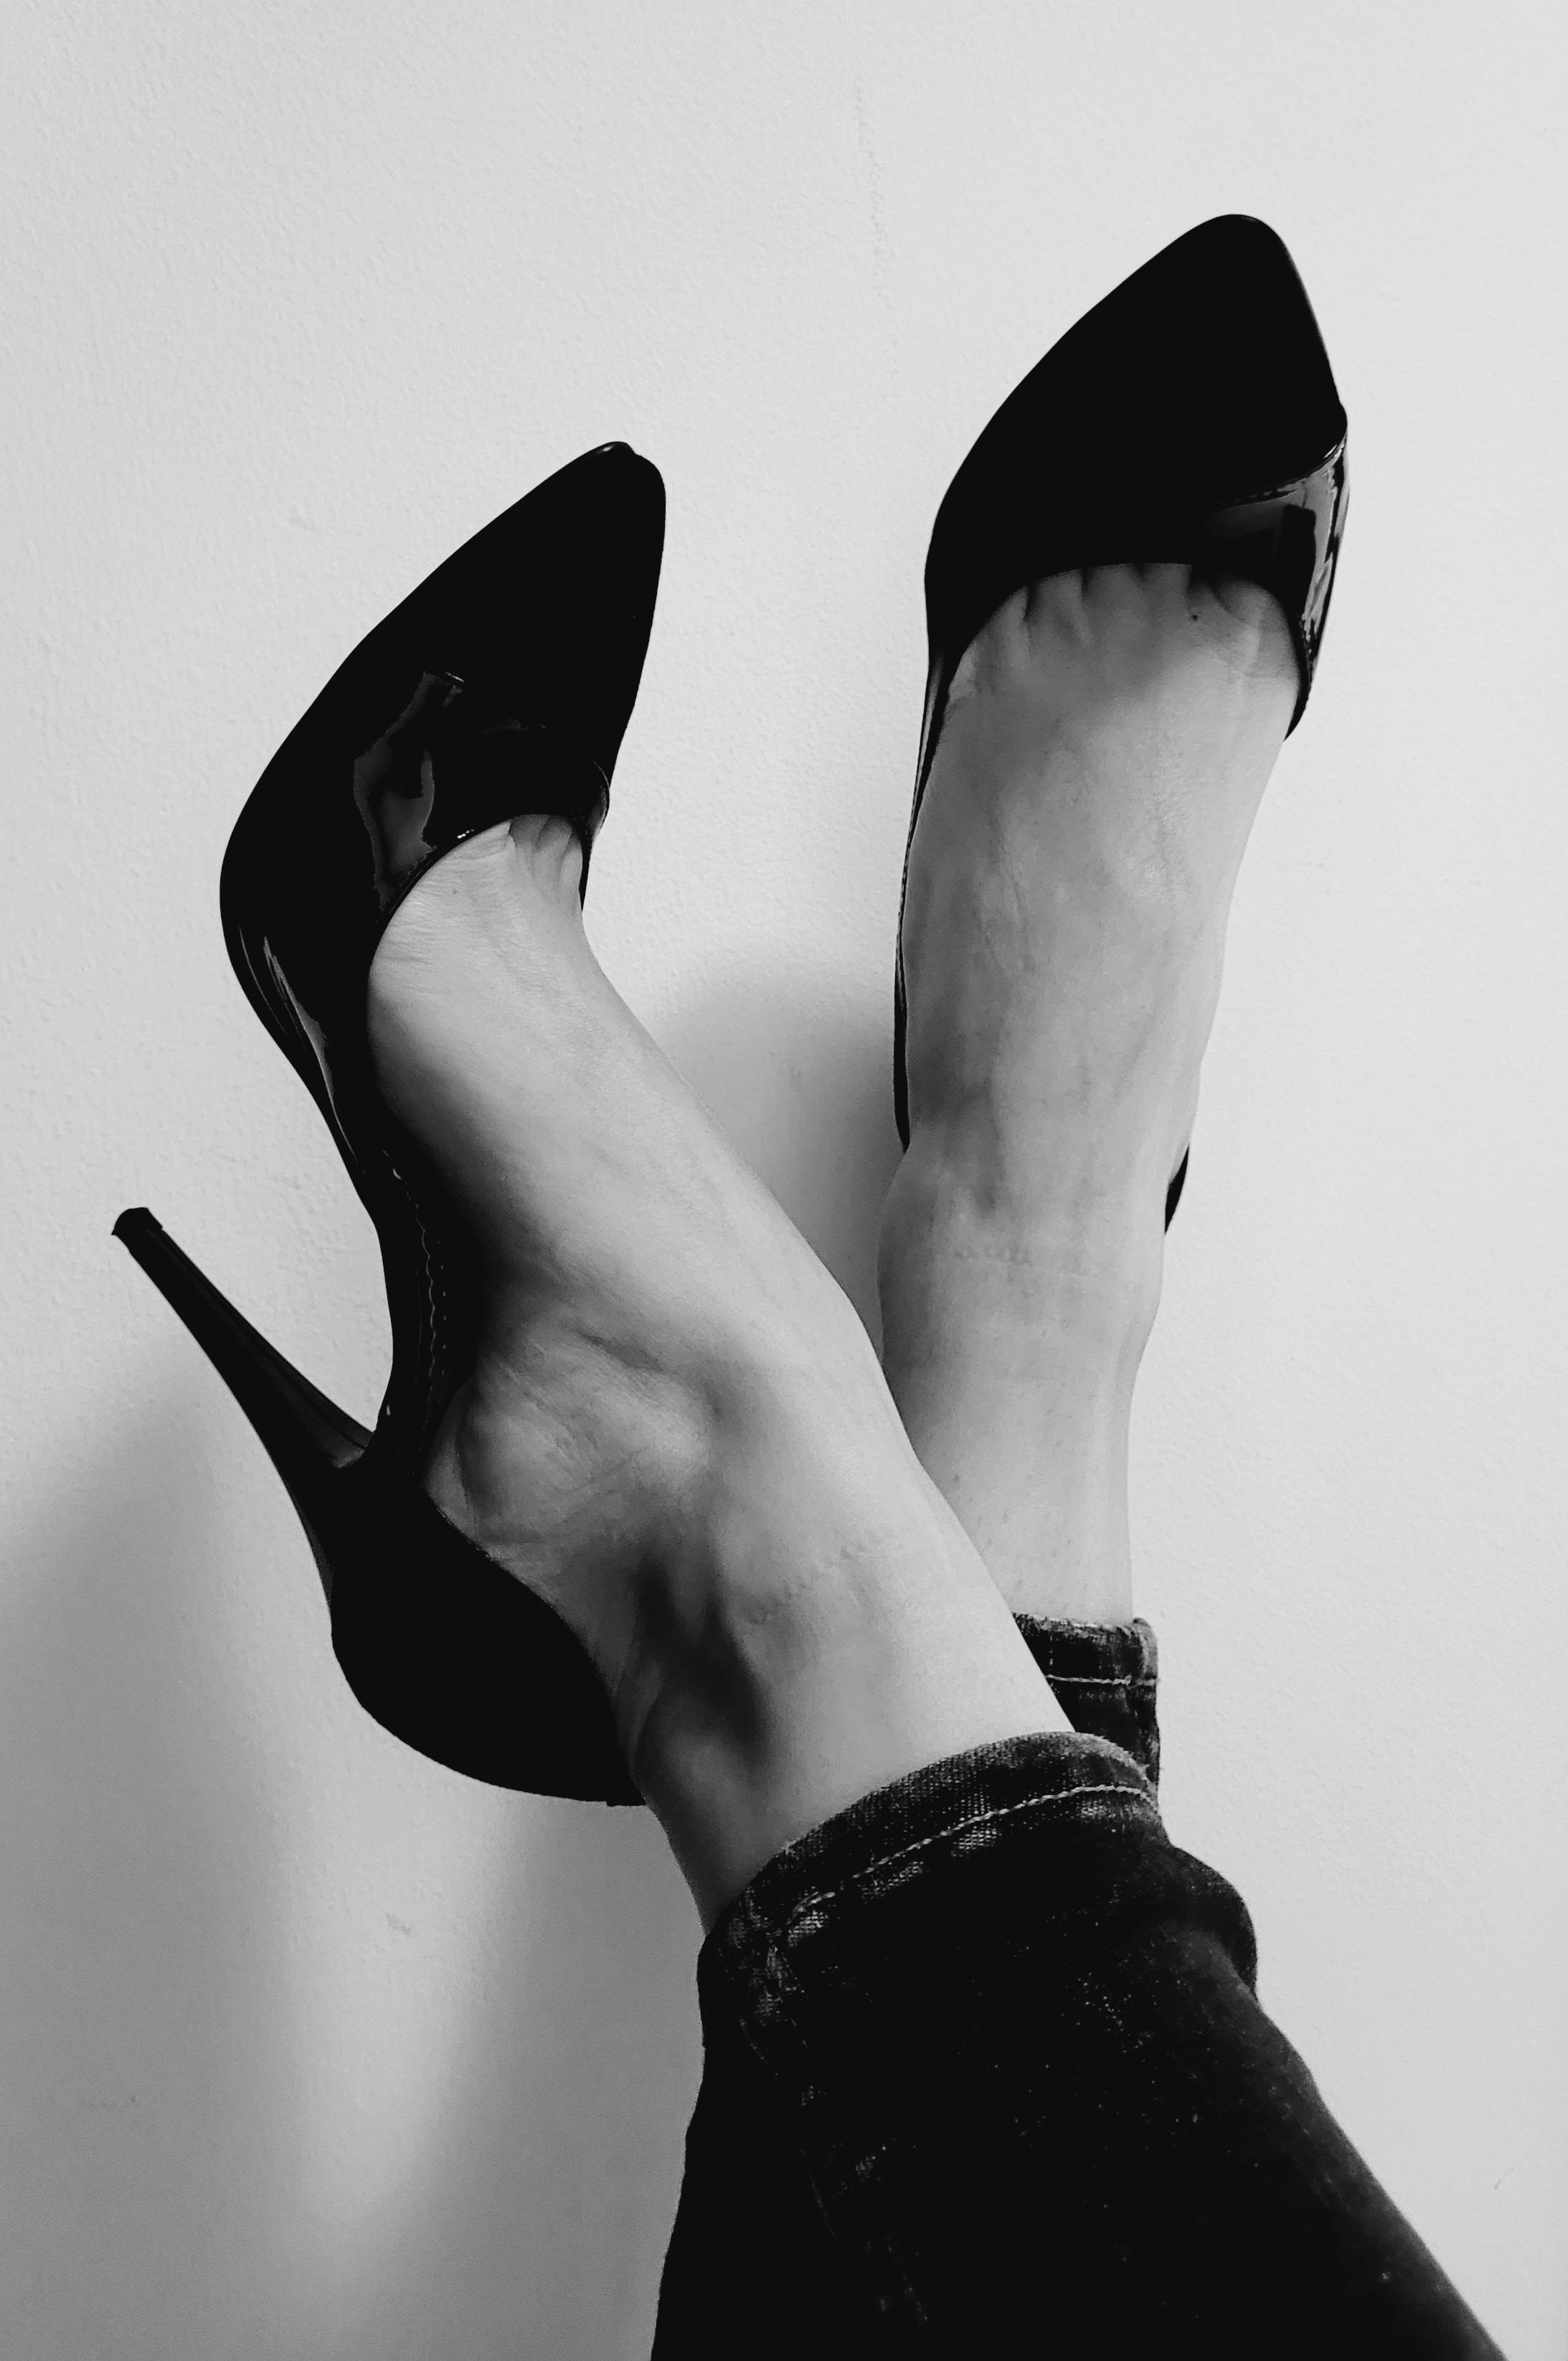 Female Legs In High Heels, Black And White Photo Stock Photo, Picture and  Royalty Free Image. Image 21023629.